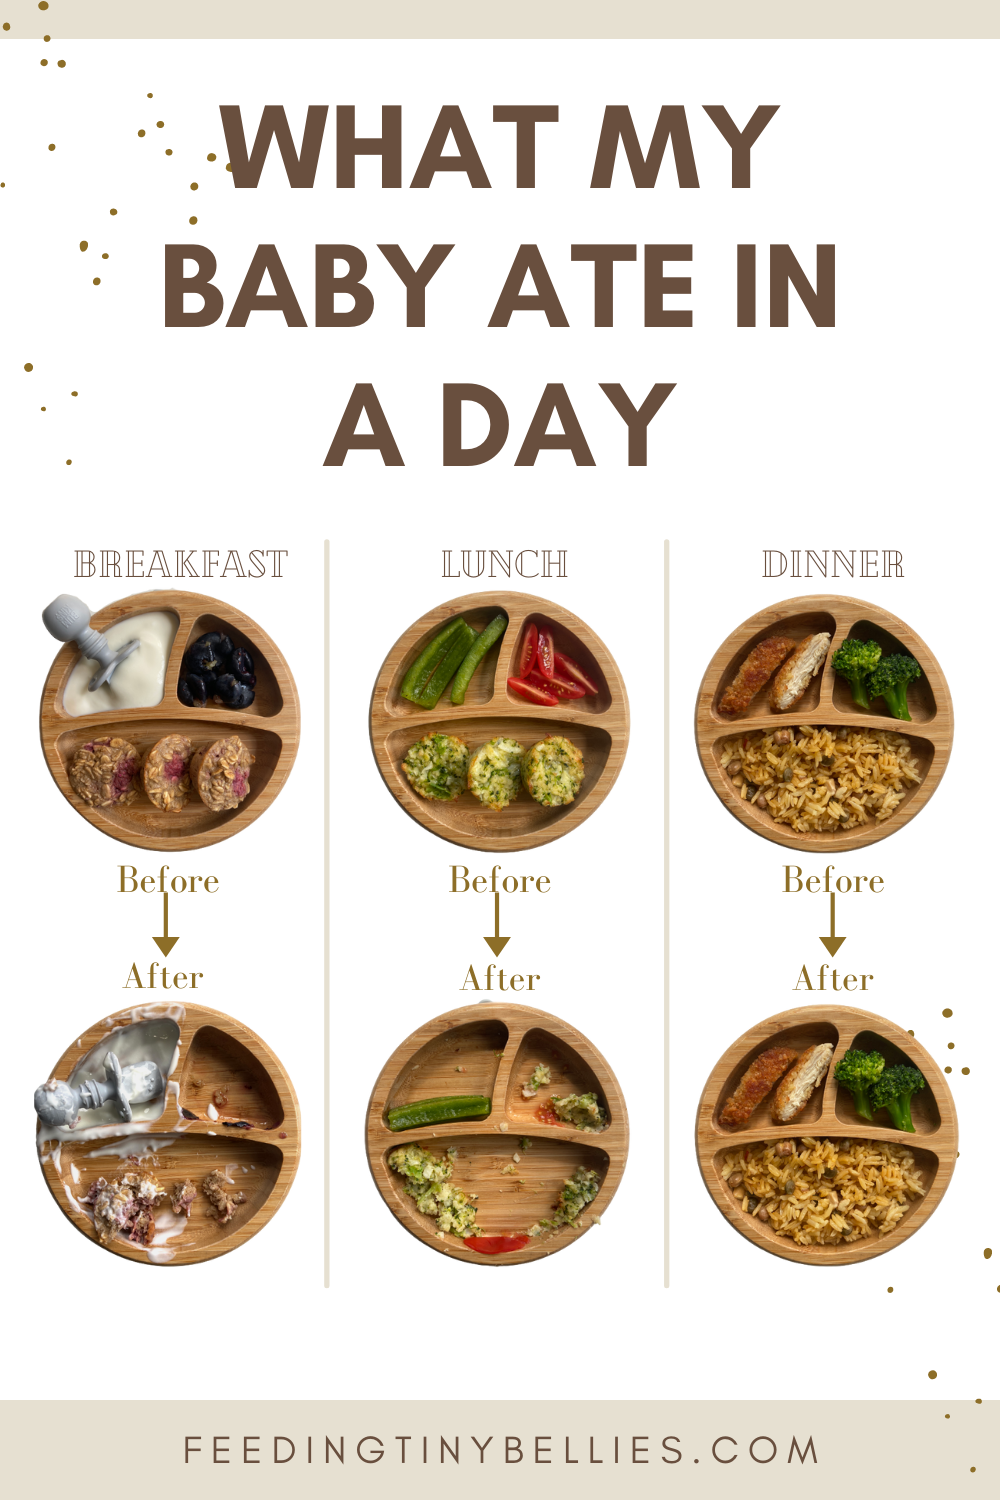 What my baby ate in a day